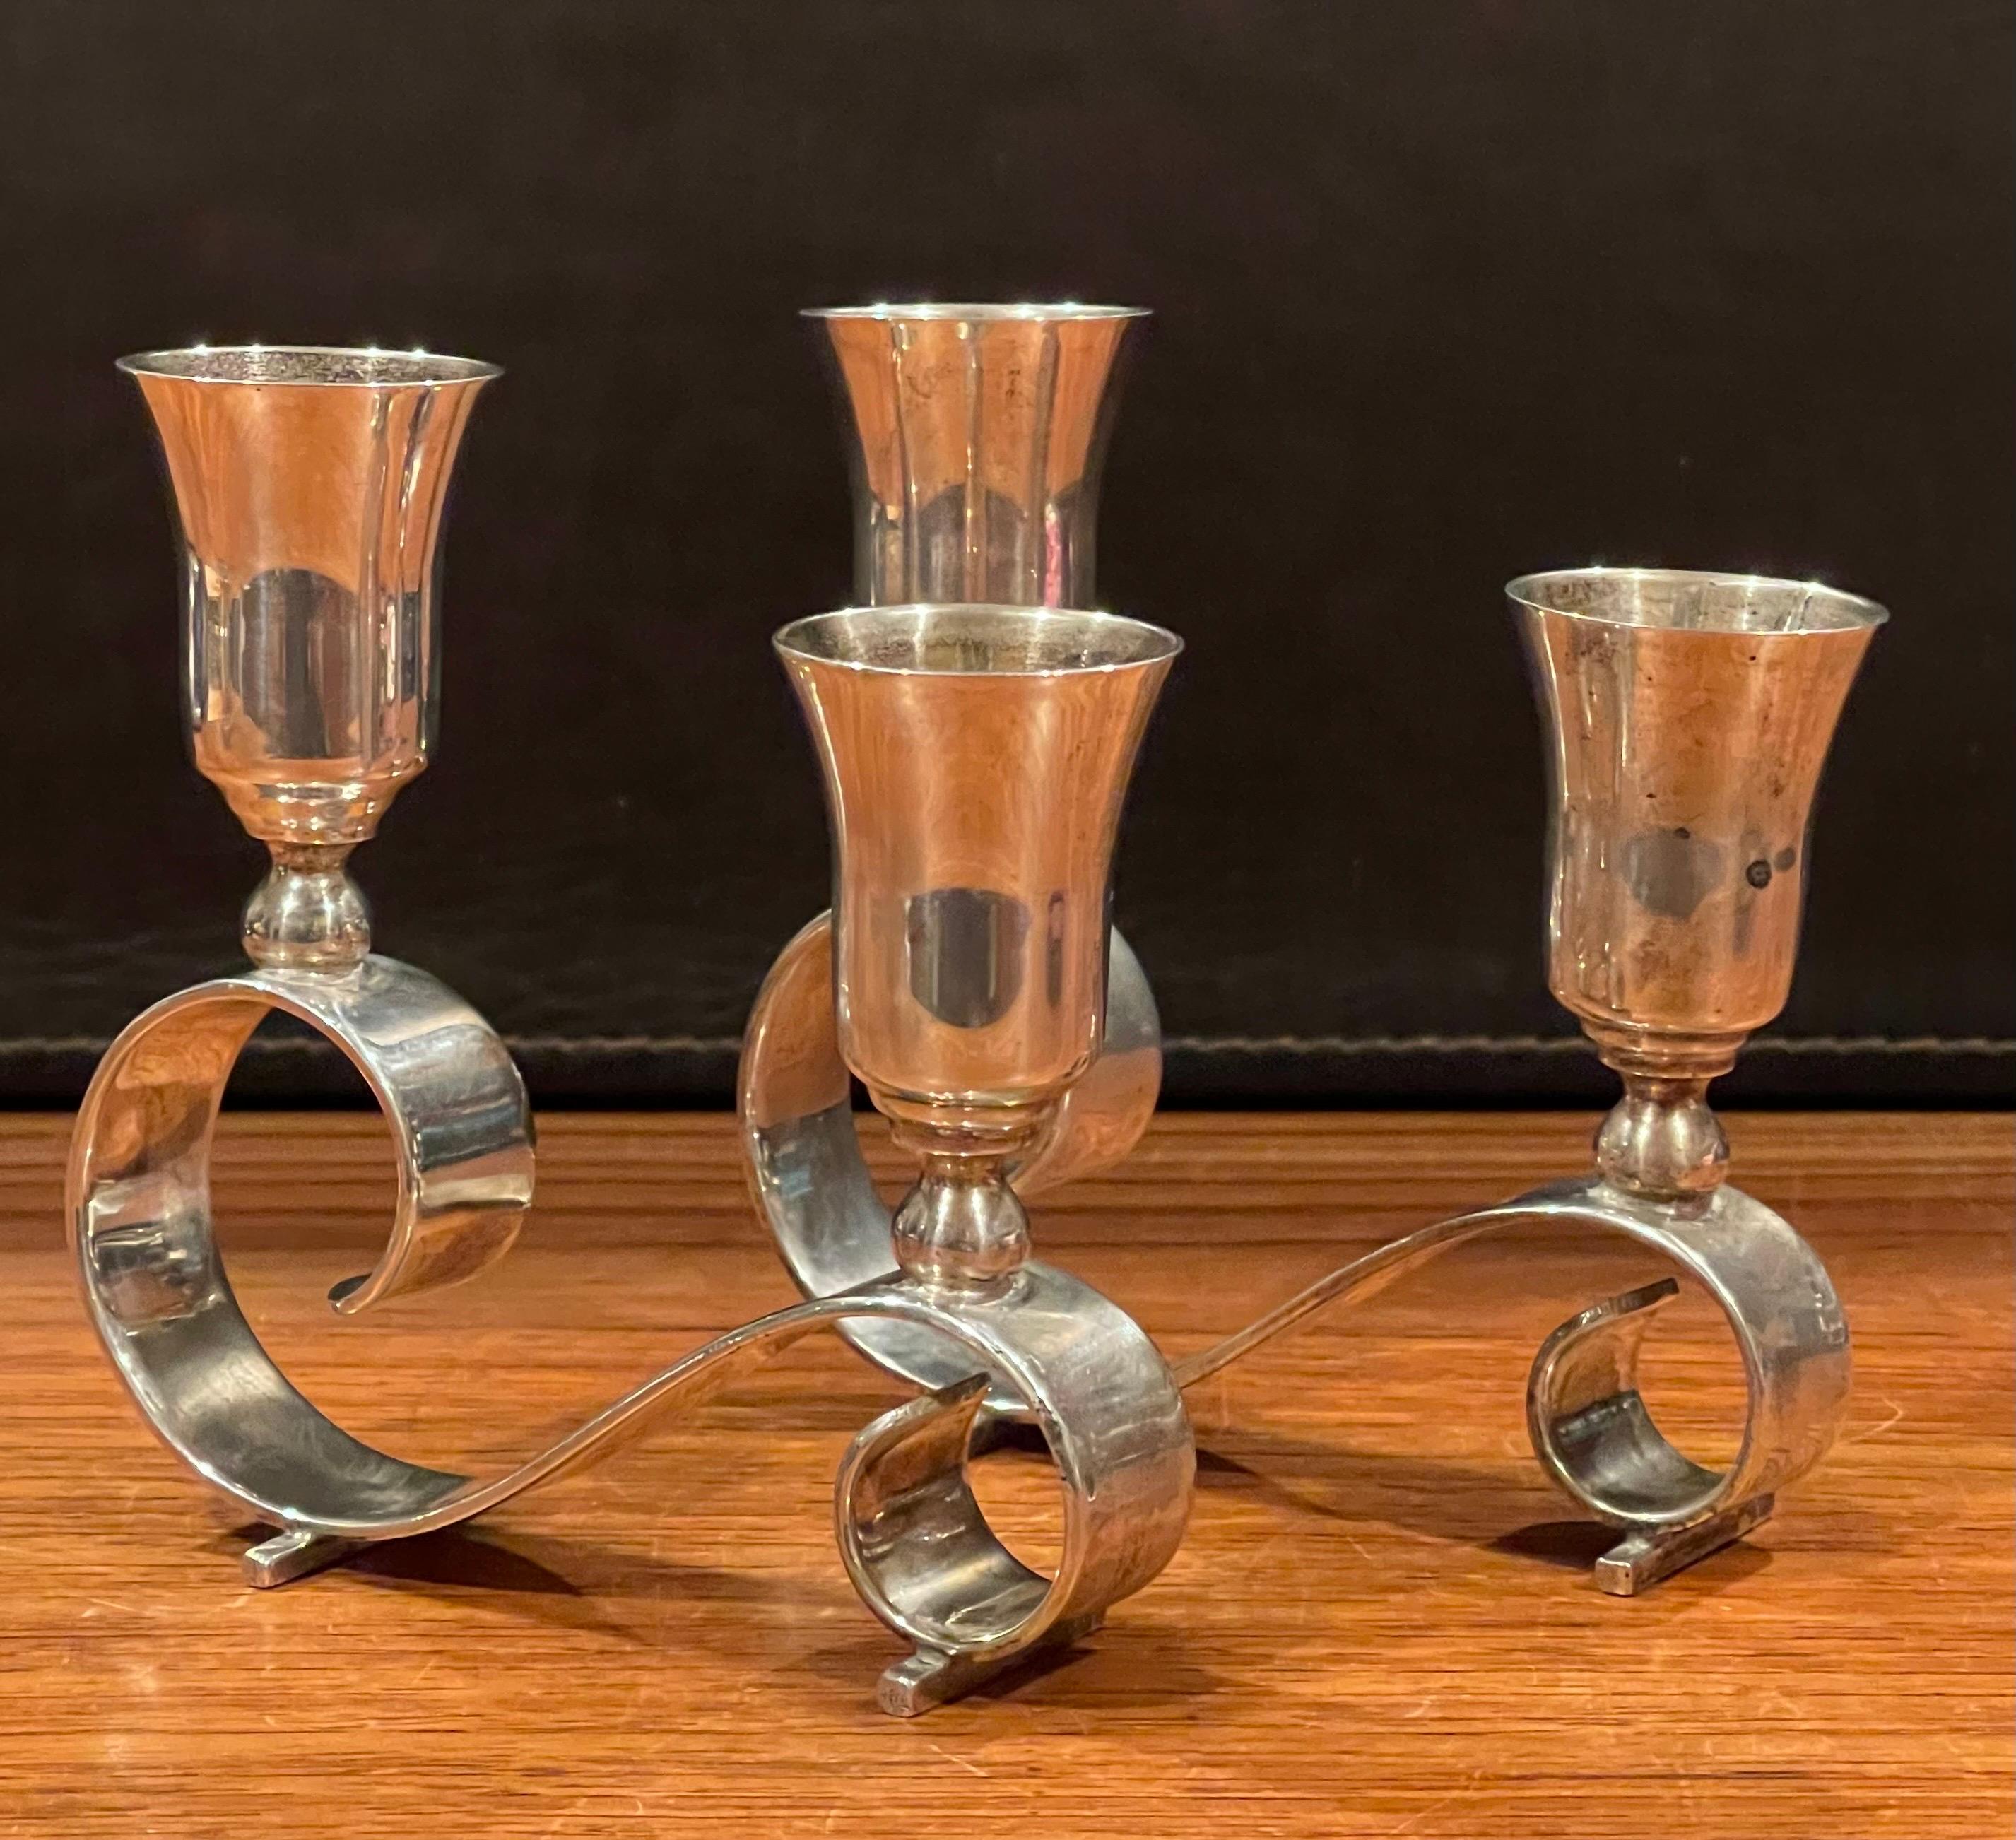 Mexican Pair of MCM Modernist Sterling Silver Candleholders by Juvento Lopez Reyes For Sale